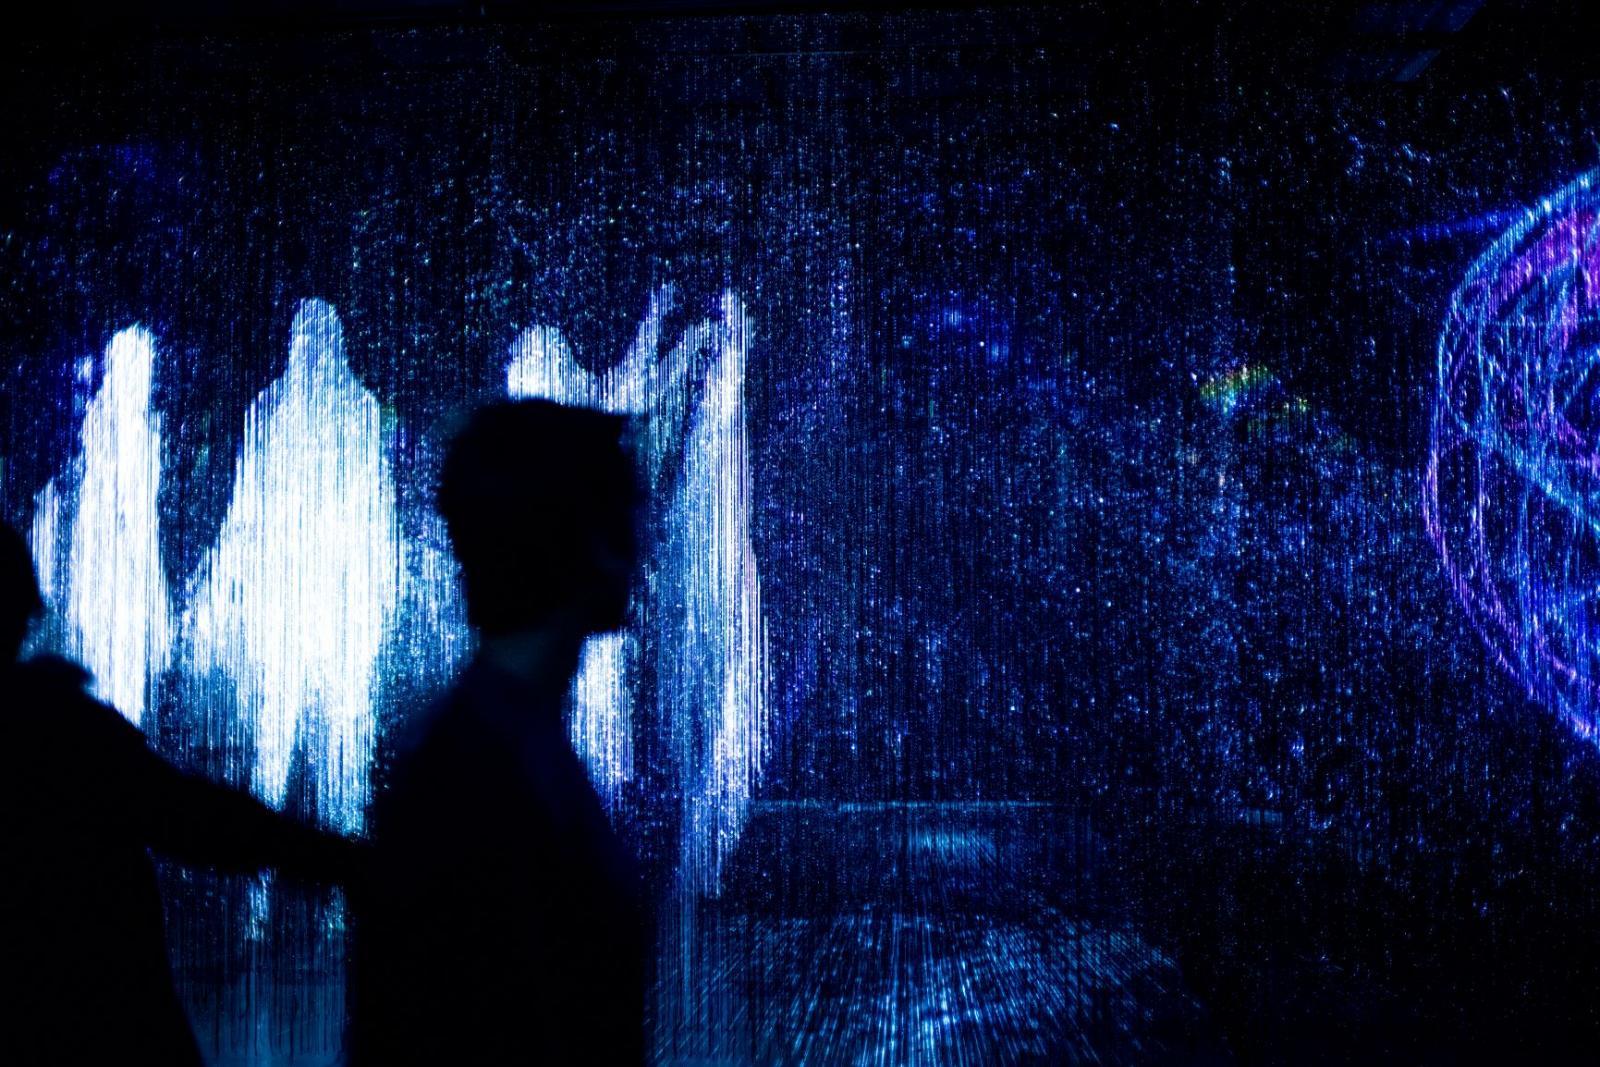 Abstract image of white ghost-like figures framing the outline of a person on a dark background.